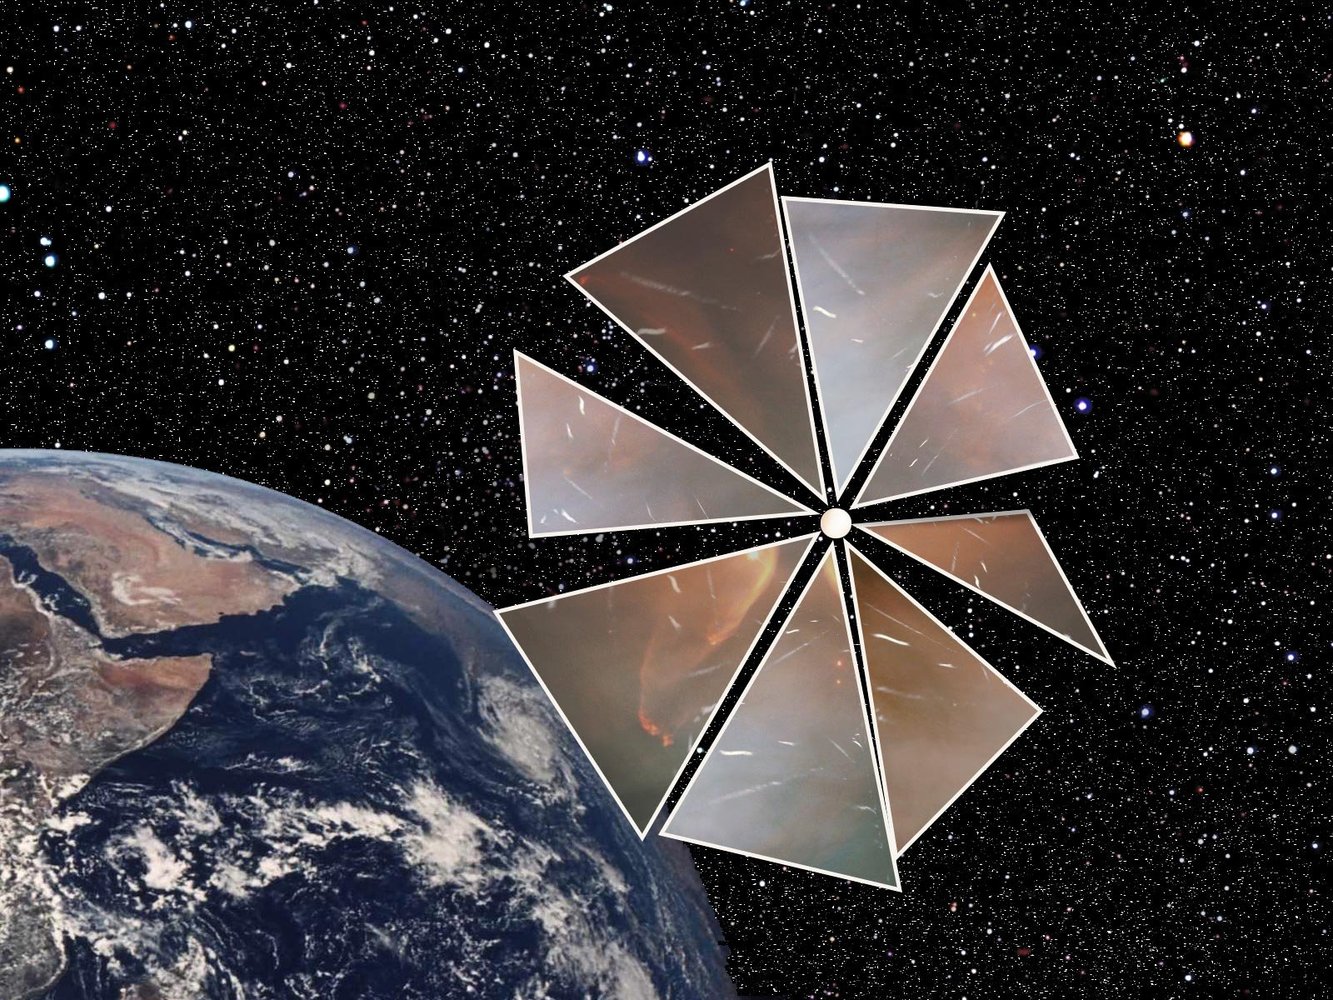 This is a imagining of Cosmos 1, The Planetary Society's experimental solar sail mission, orbiting around the Earth.